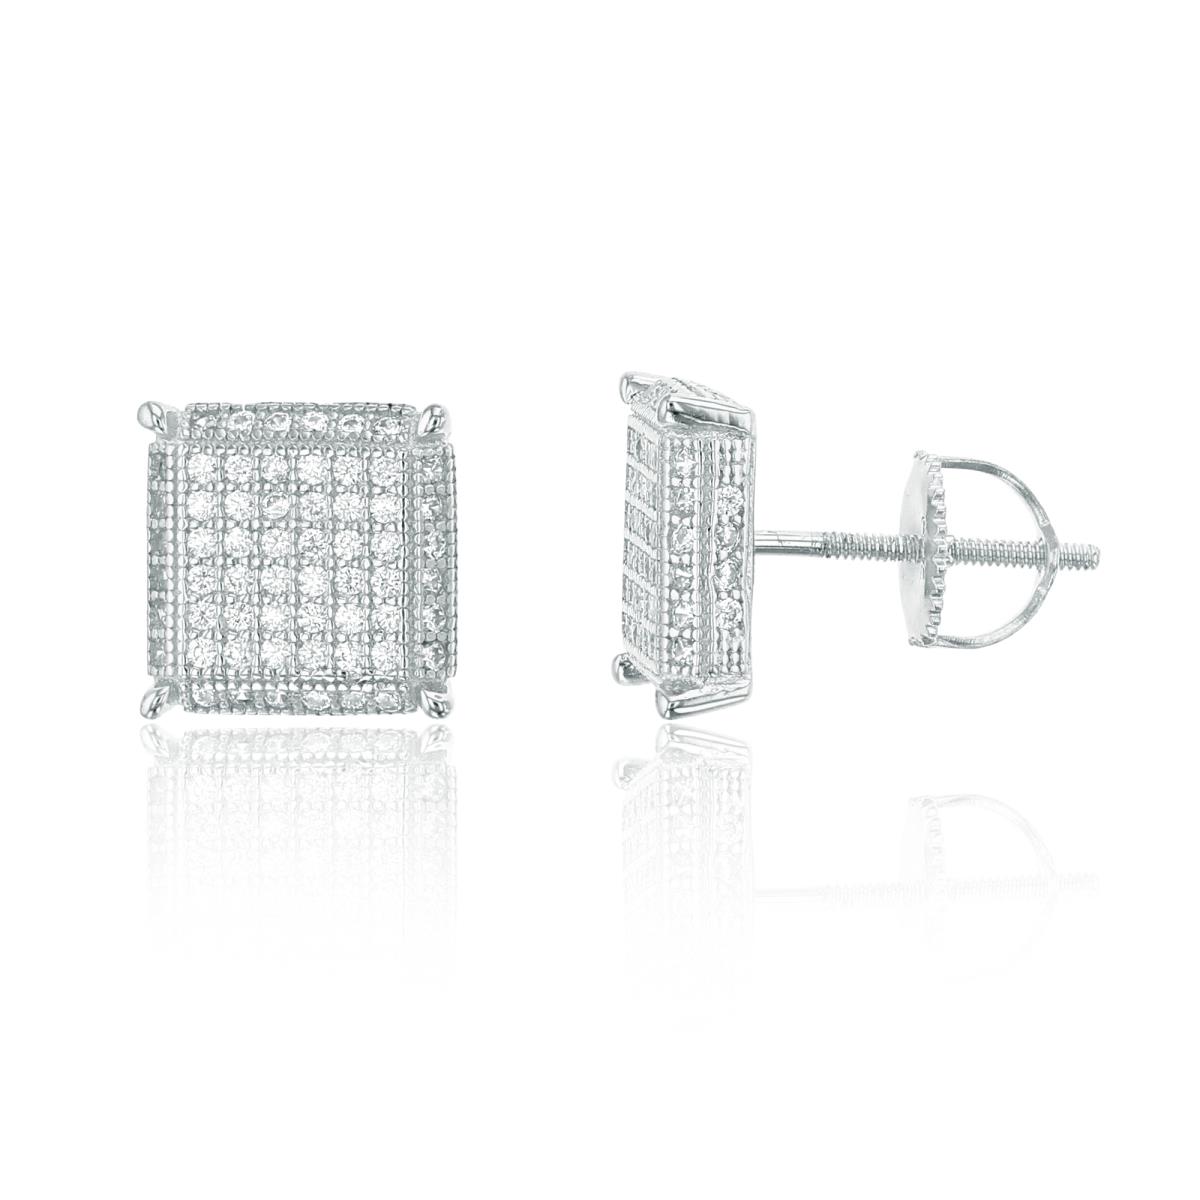 Sterling Silver 10x10mm Micropave 3D Square Screwback Stud Earring